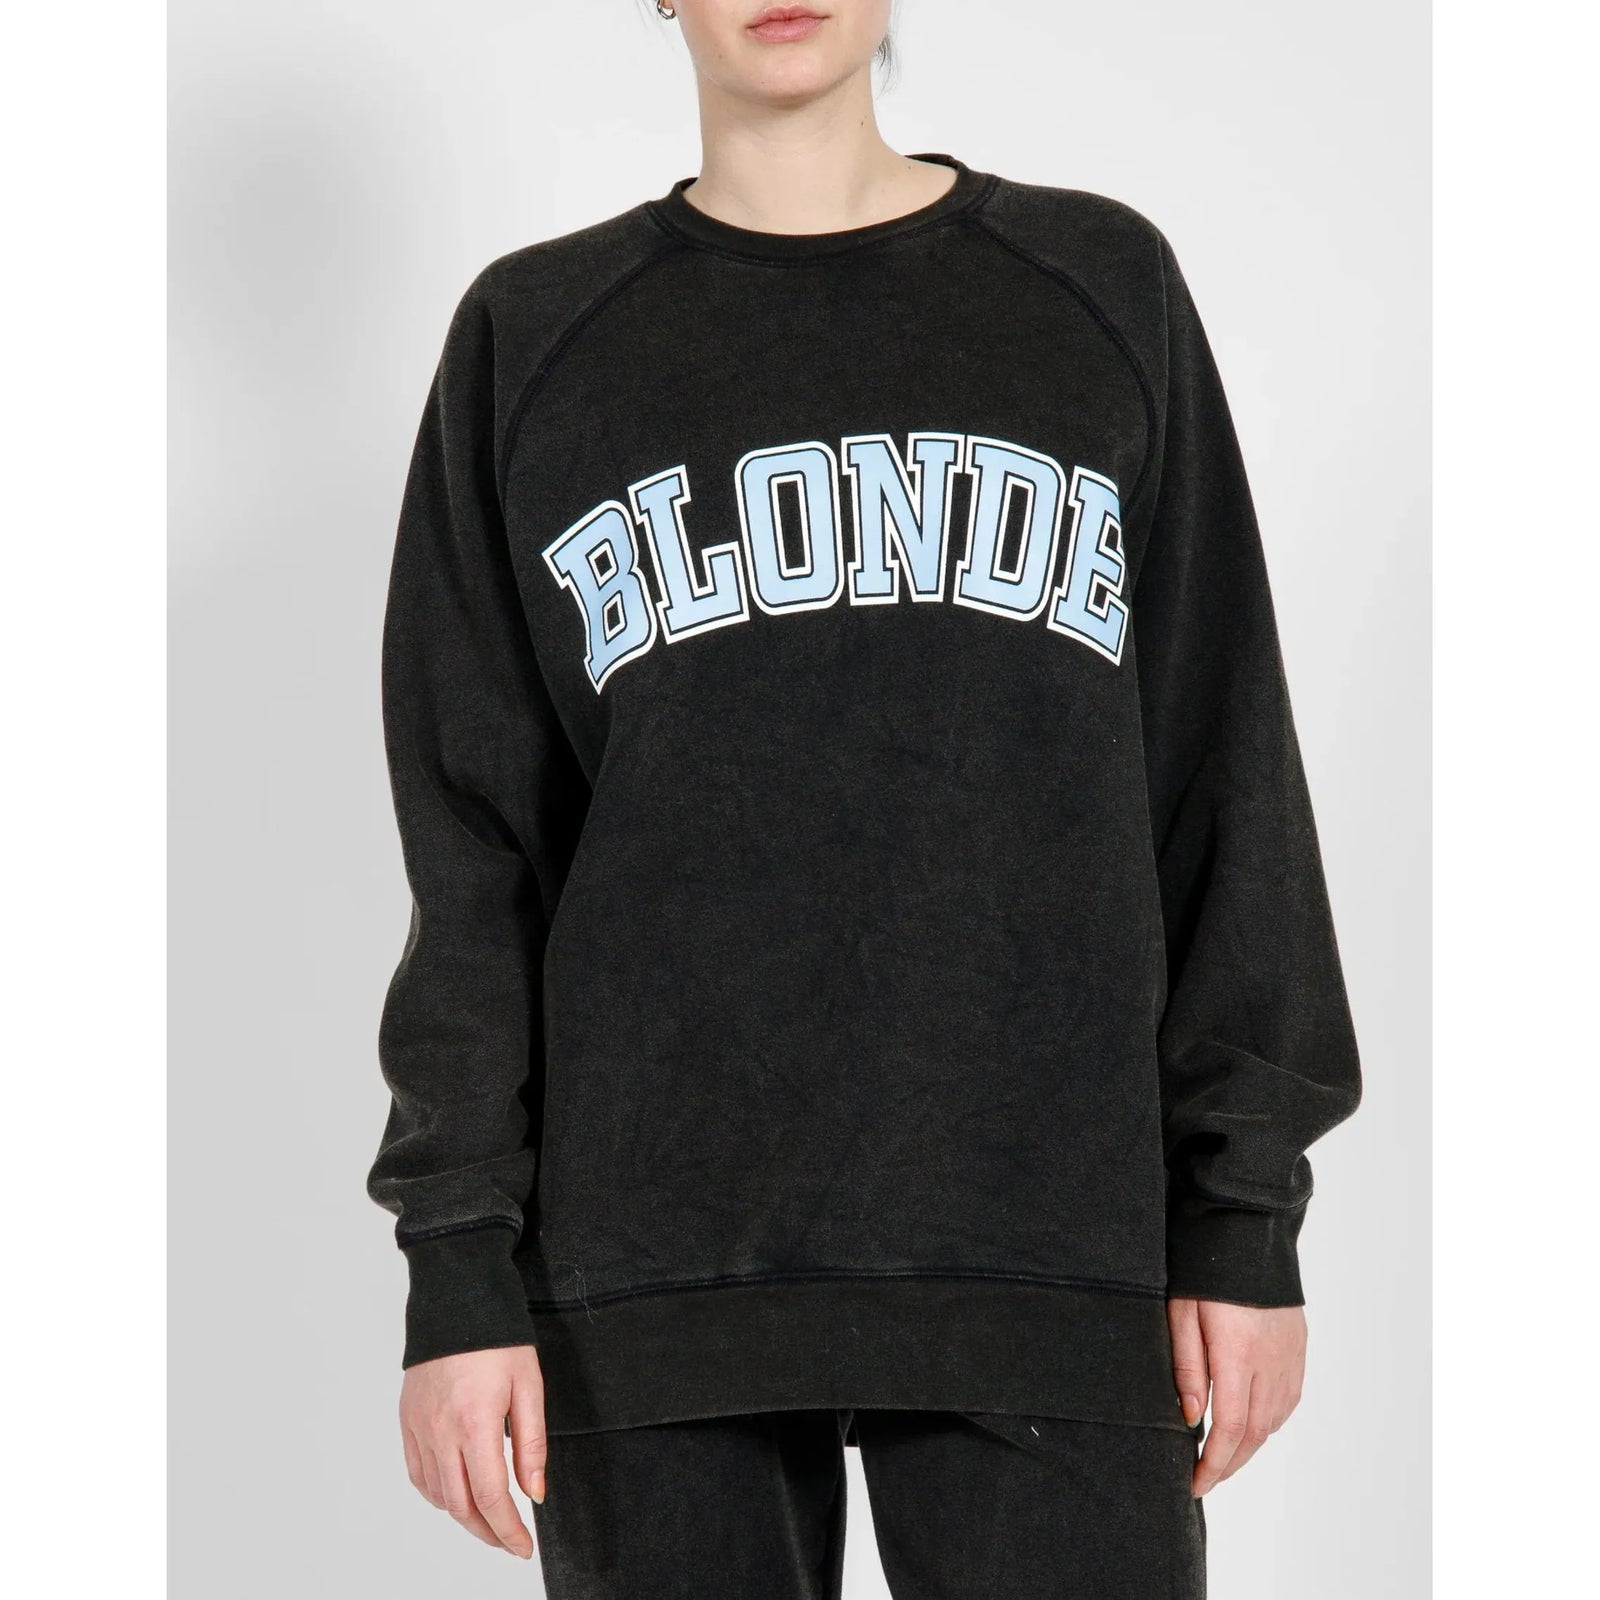 Brunette the Label Washed Black-Baby Blue / XS-S Brunette the Label Blonde Not Your Boyfriend Crew w/ Varsity Haircolours